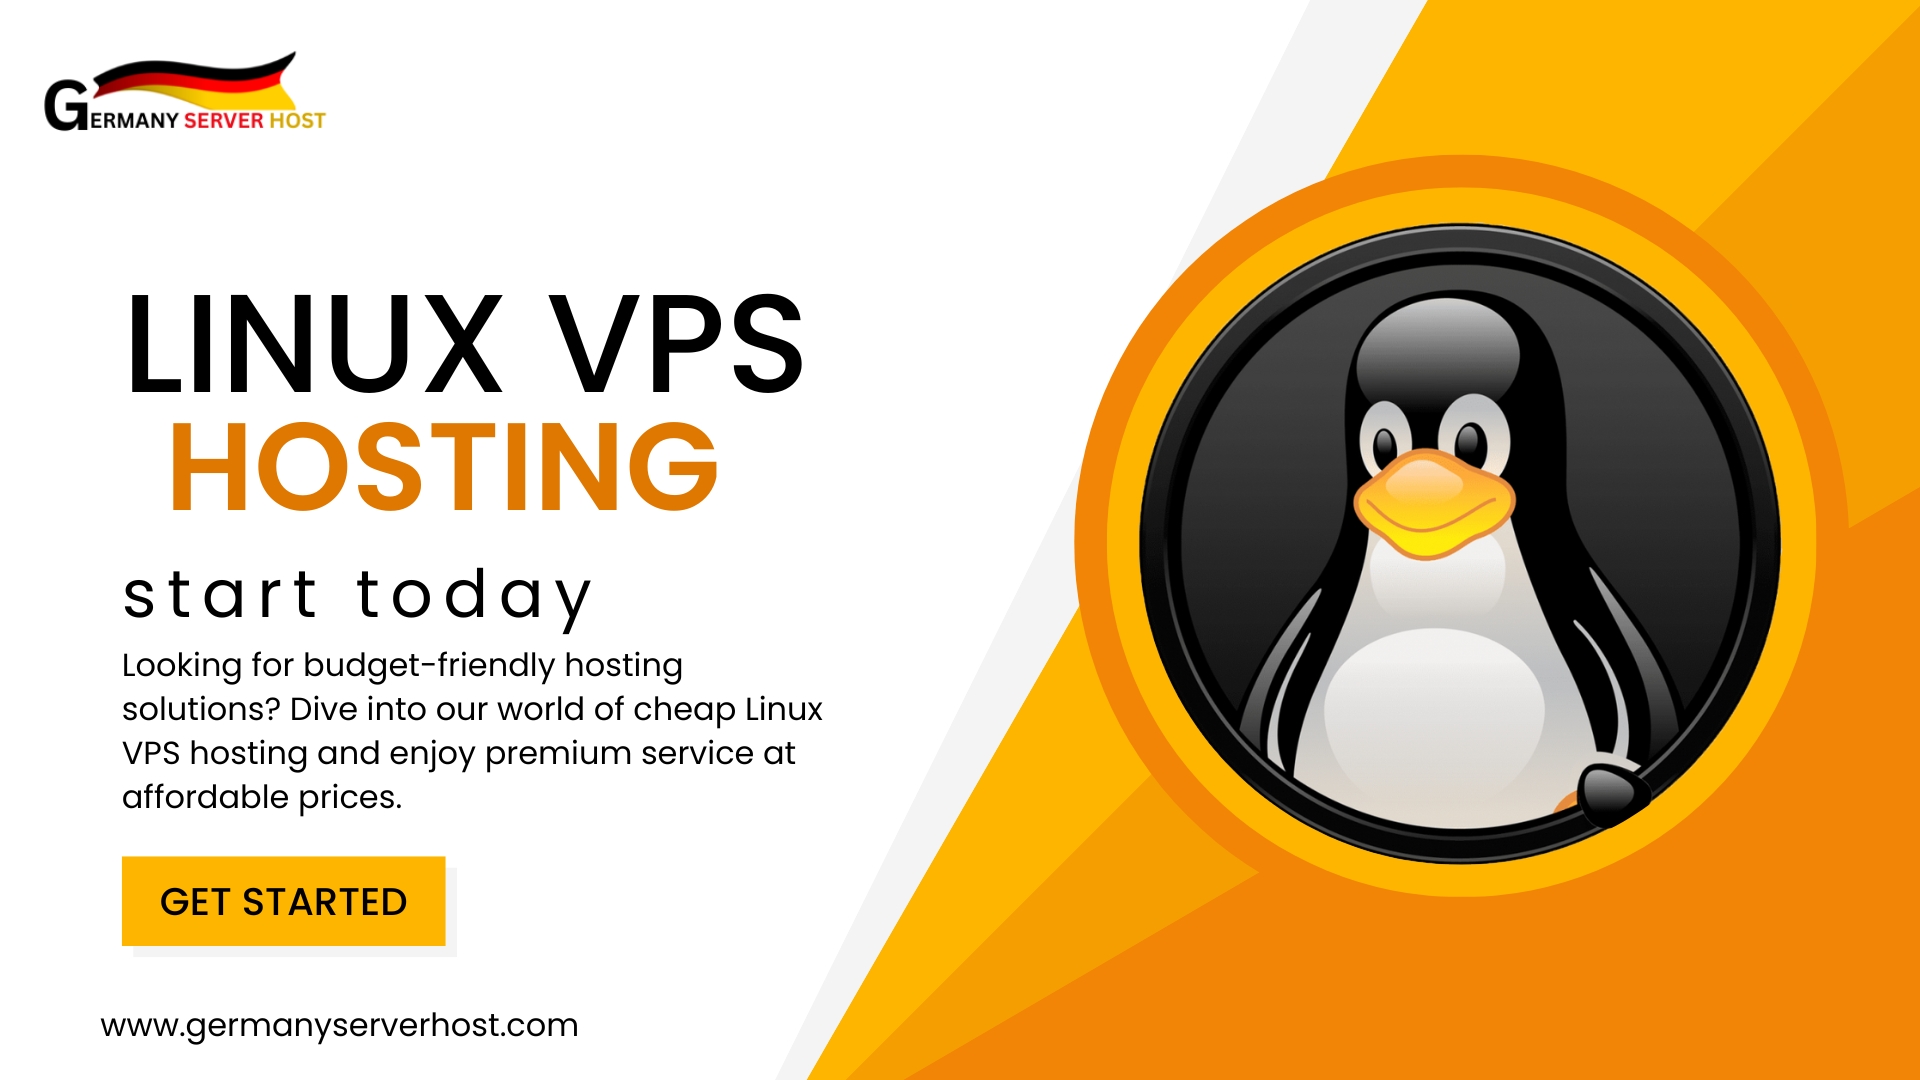 Discover Budget-Friendly Linux VPS Hosting Solutions